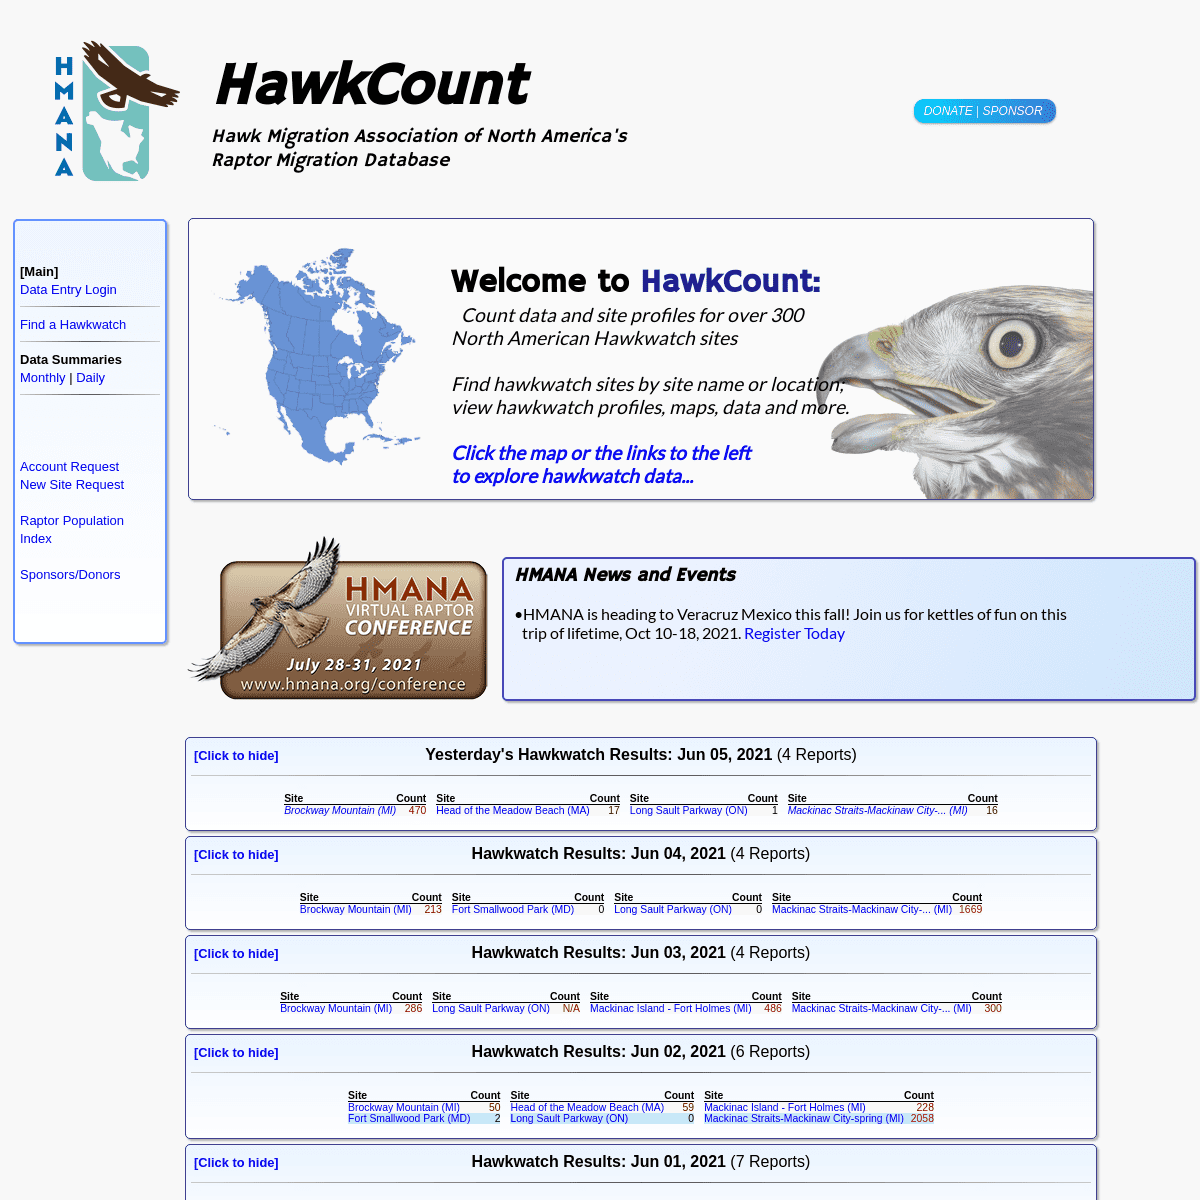 A complete backup of https://hawkcount.org